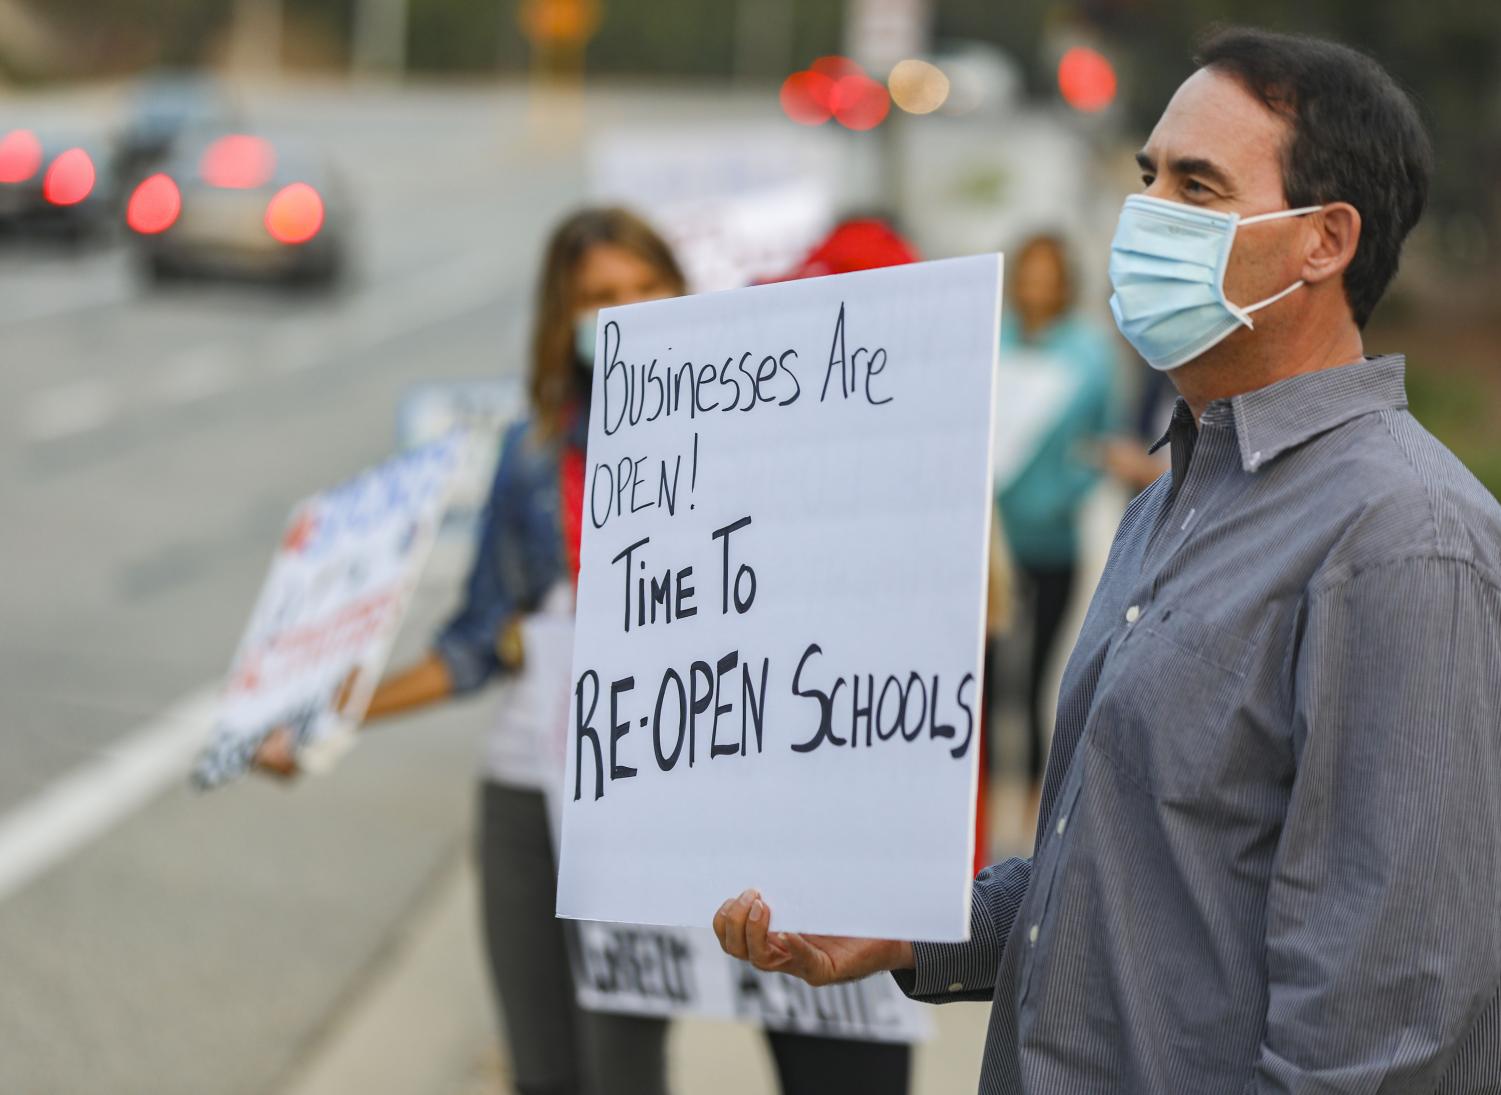 Raymond Fontayne holds up a sign in support of re-opening schools during the